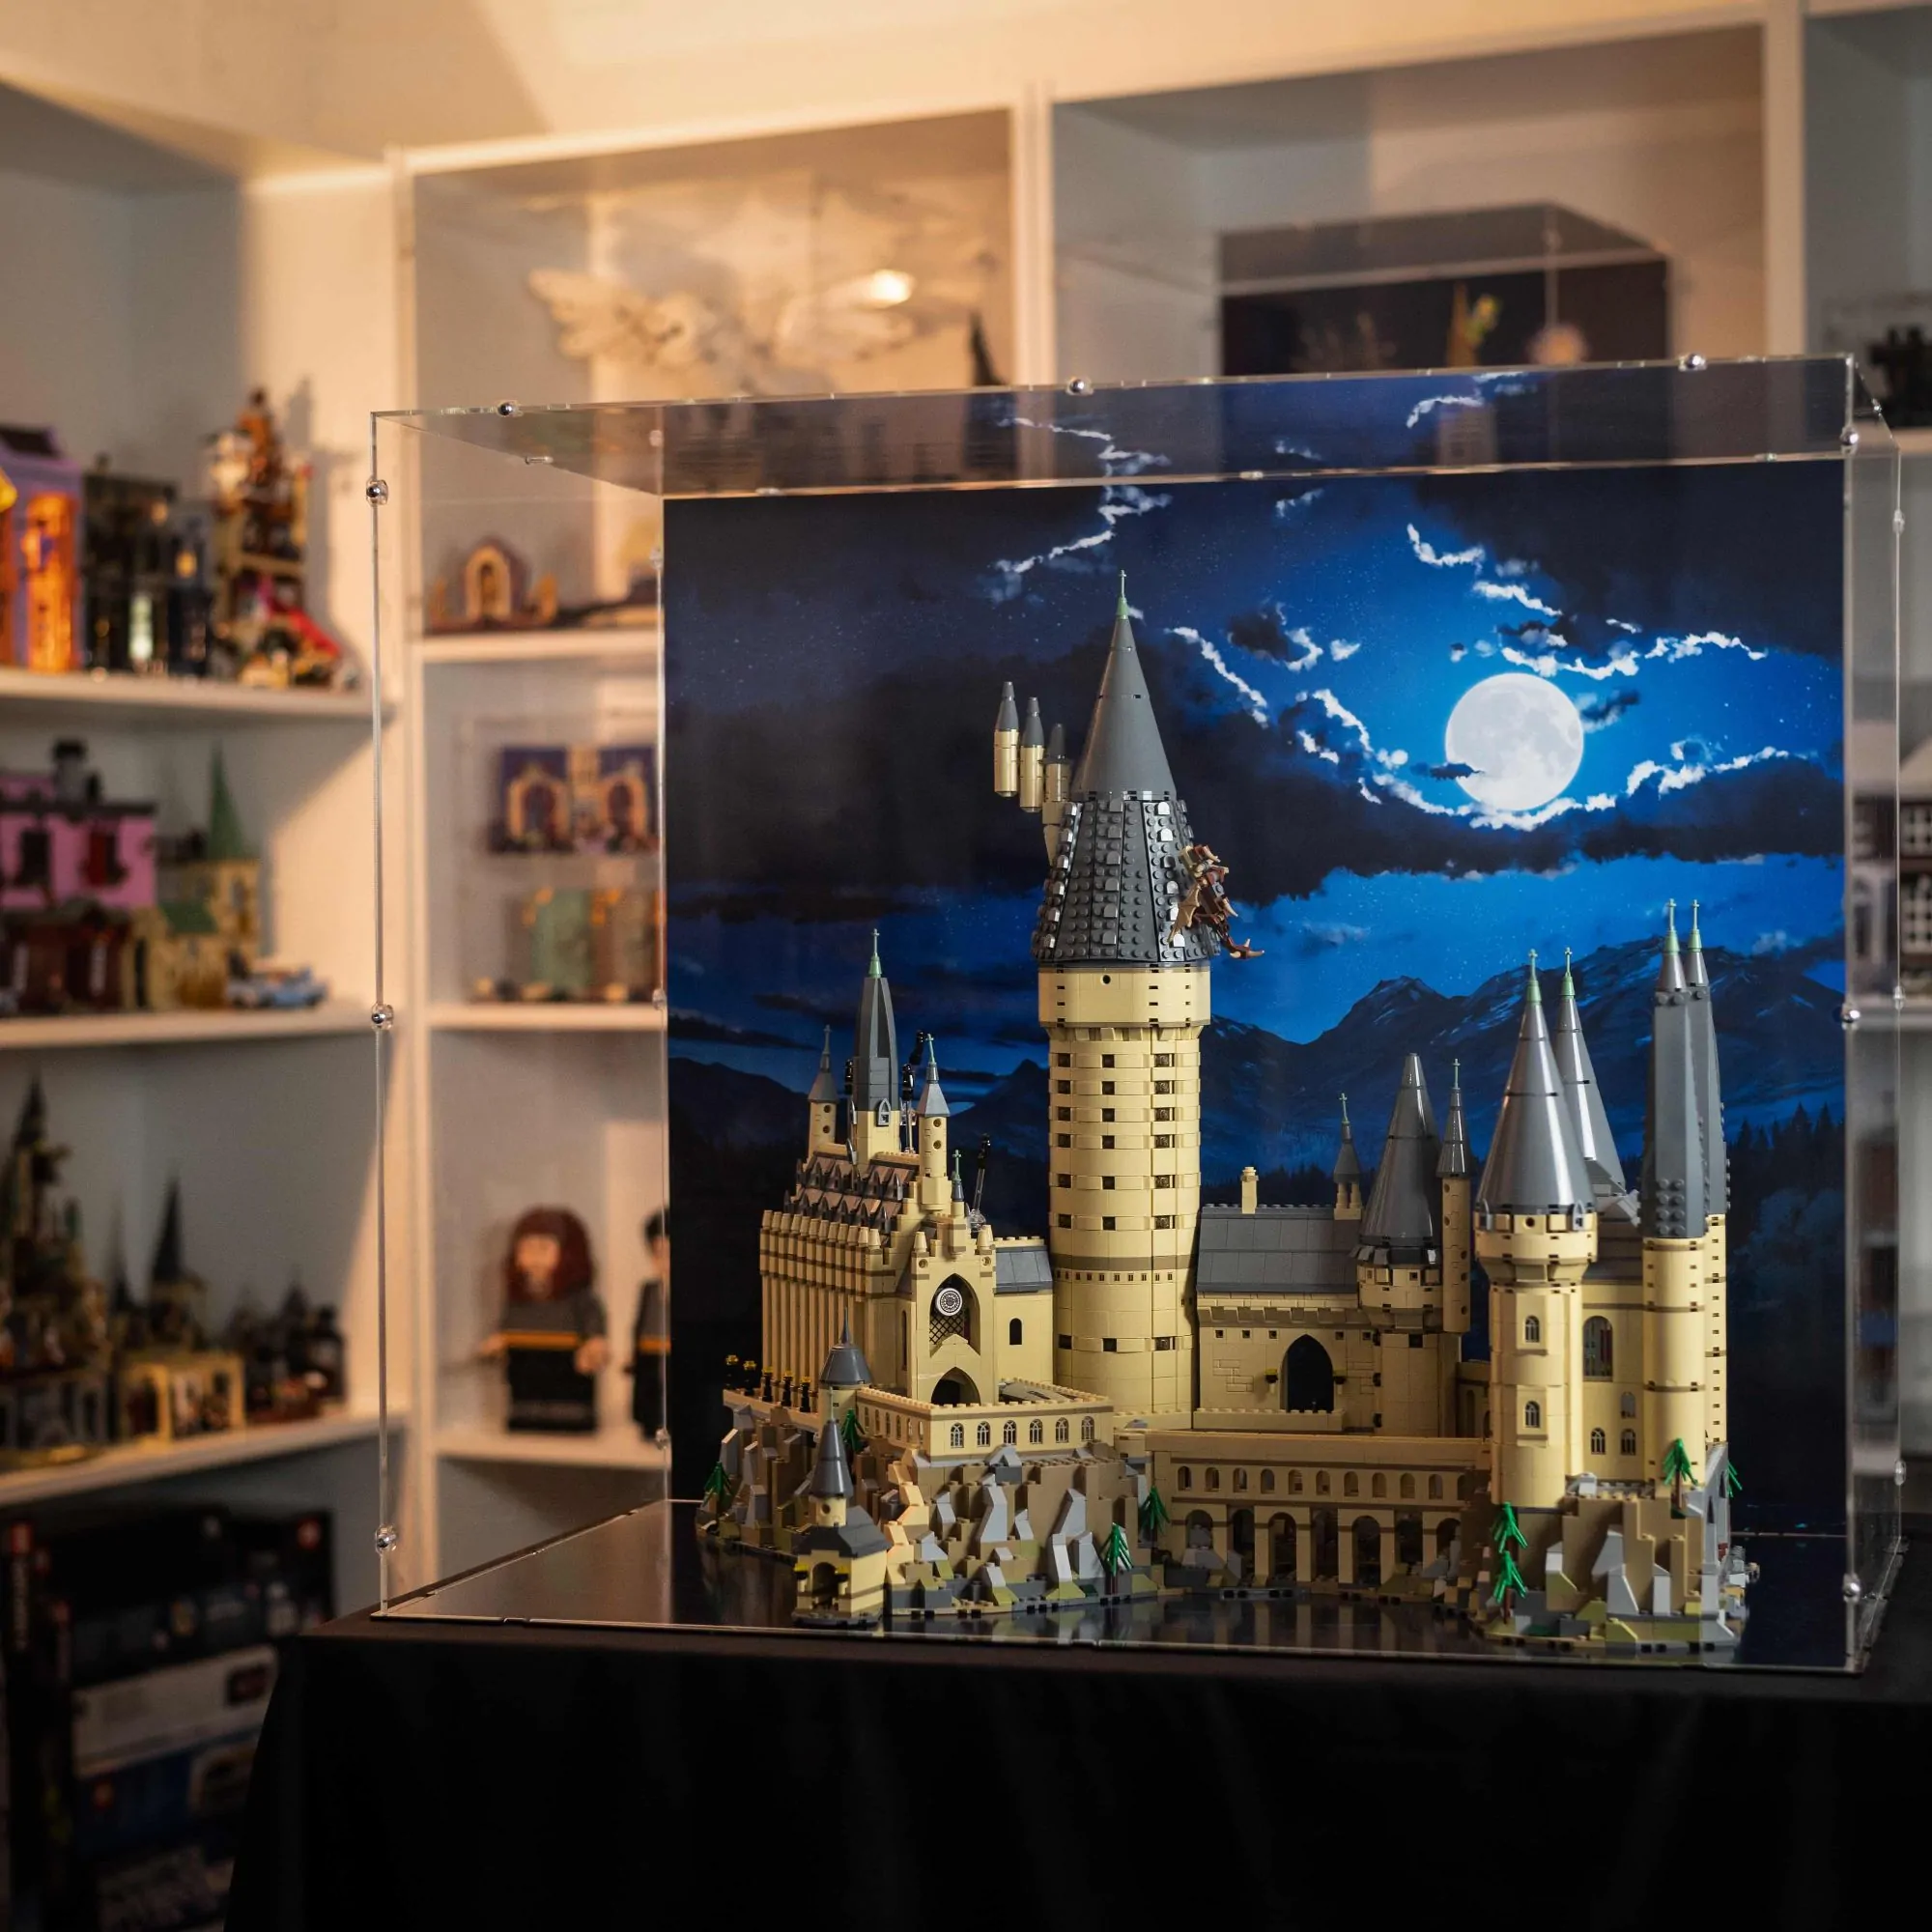 Harry Potter display nearly finished: lego